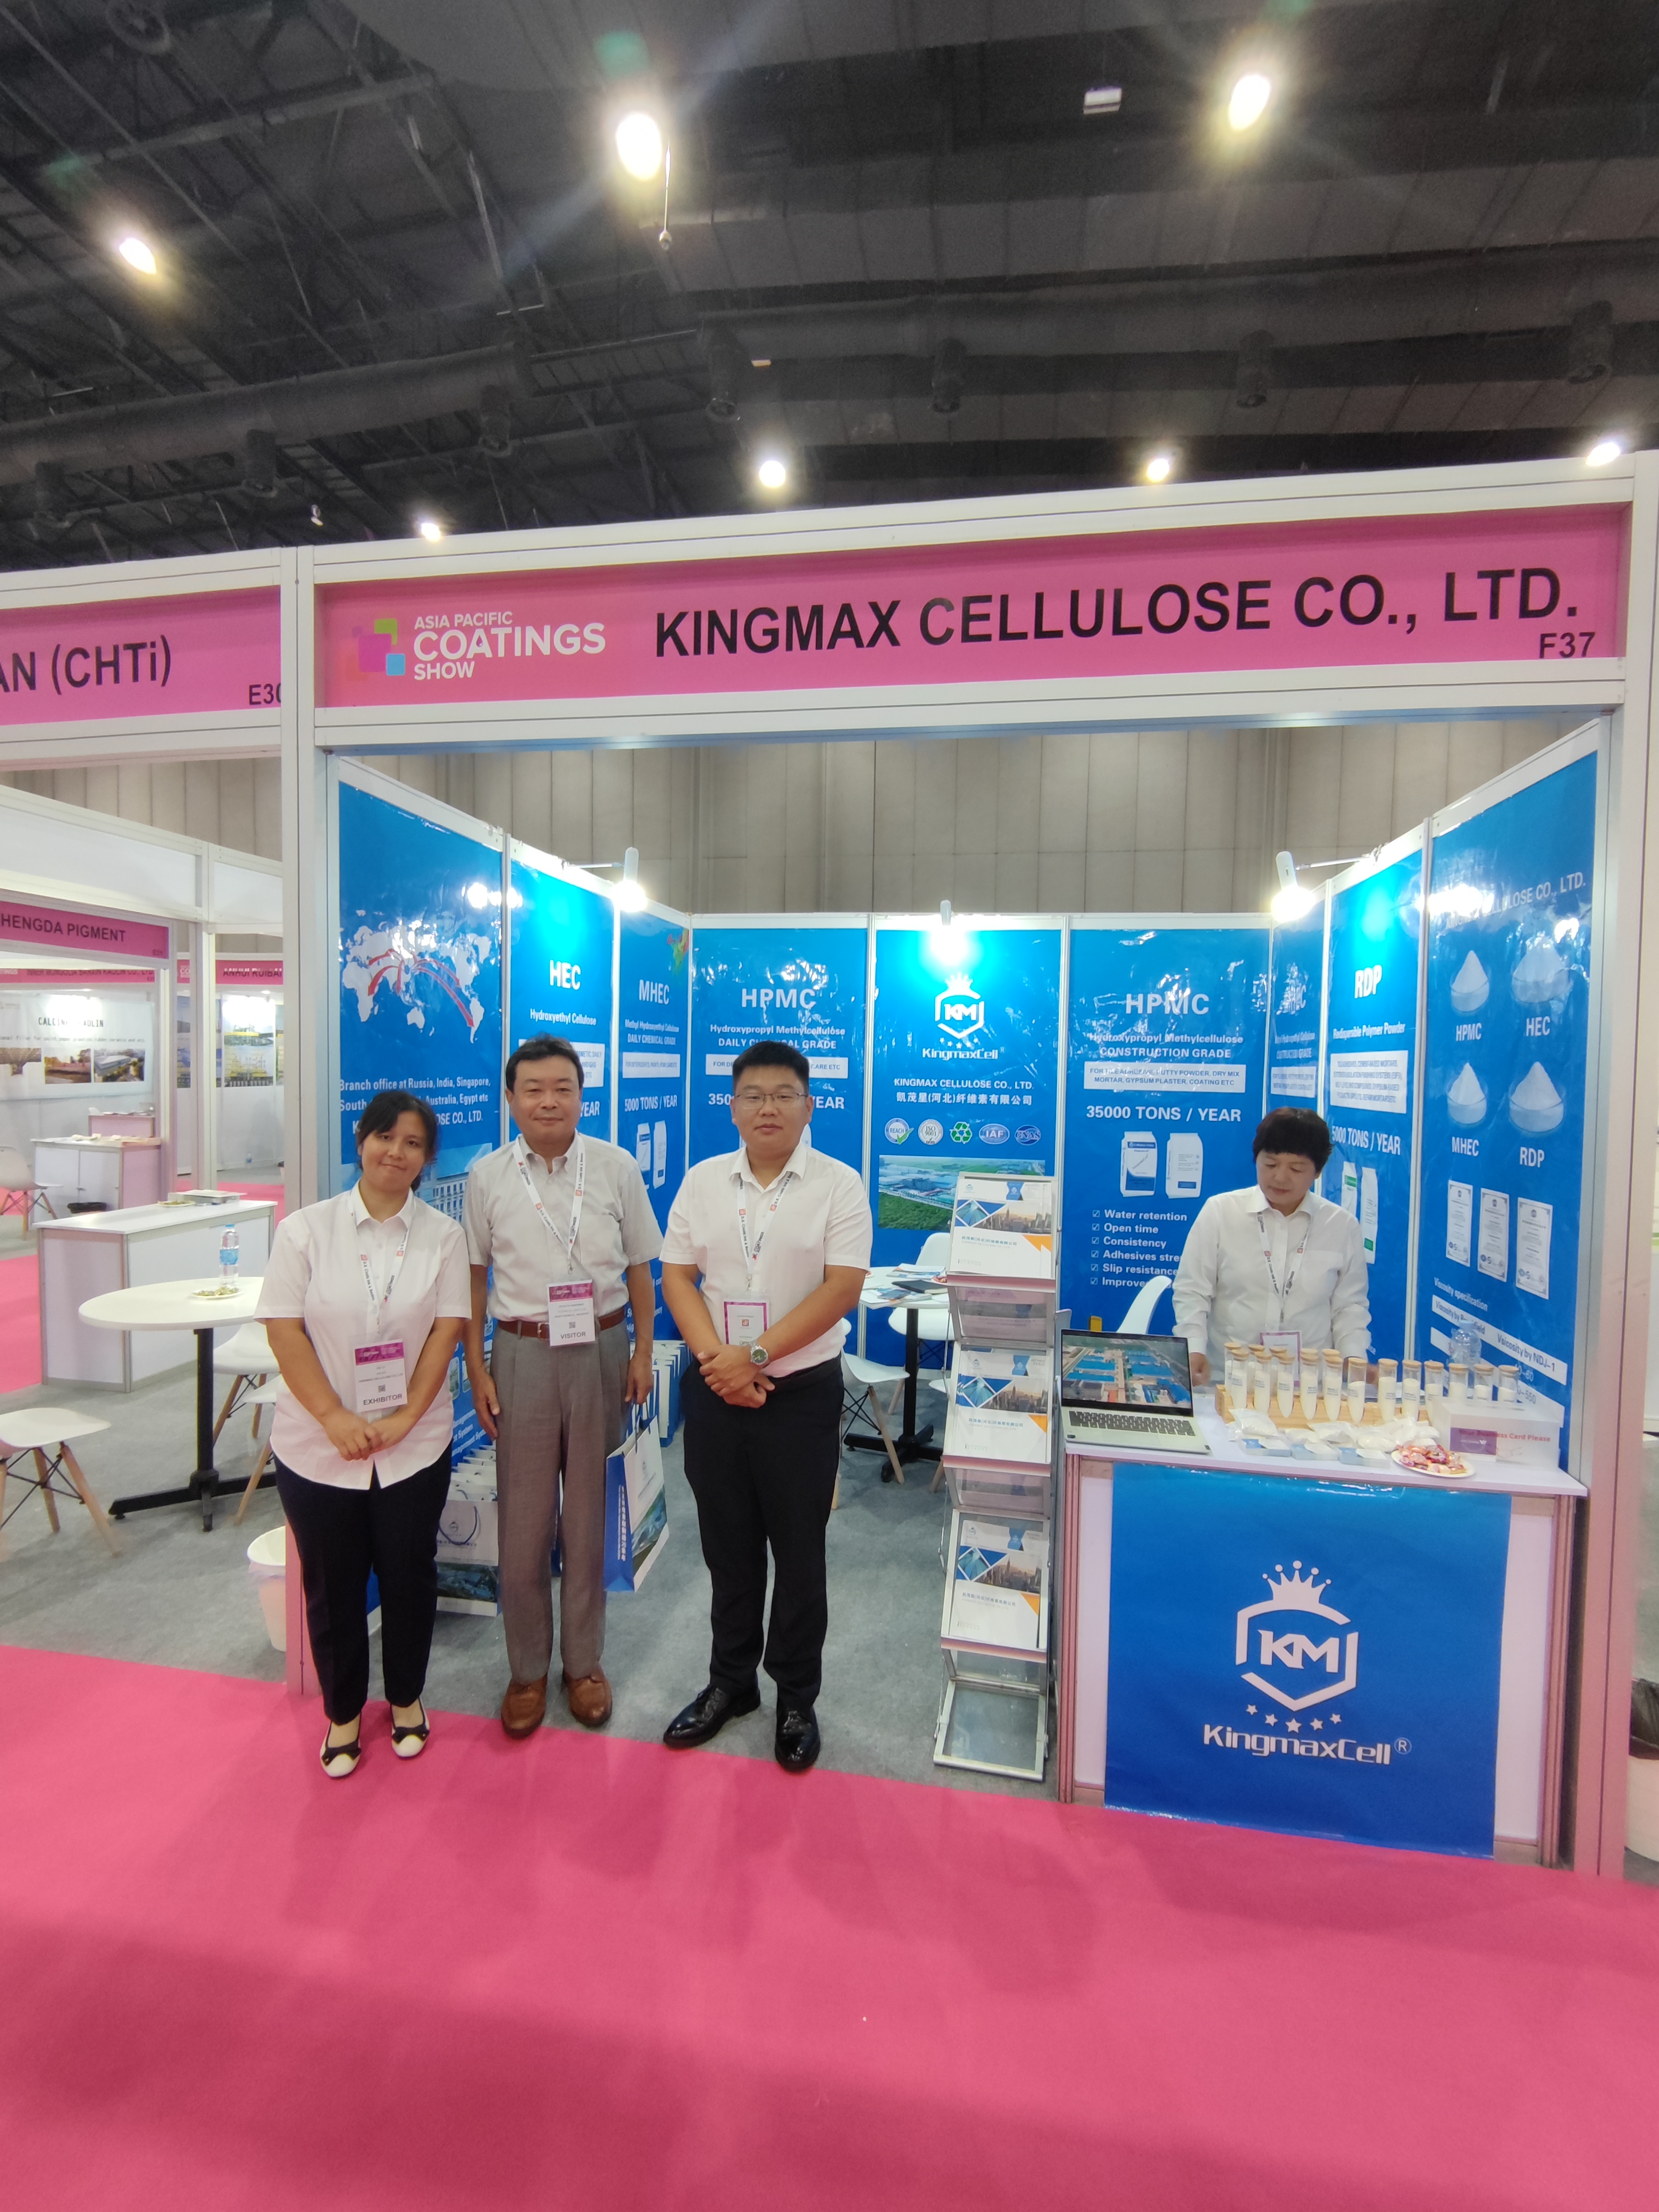 Kingmax Cellulose Thailand Coating Show in Full Swing